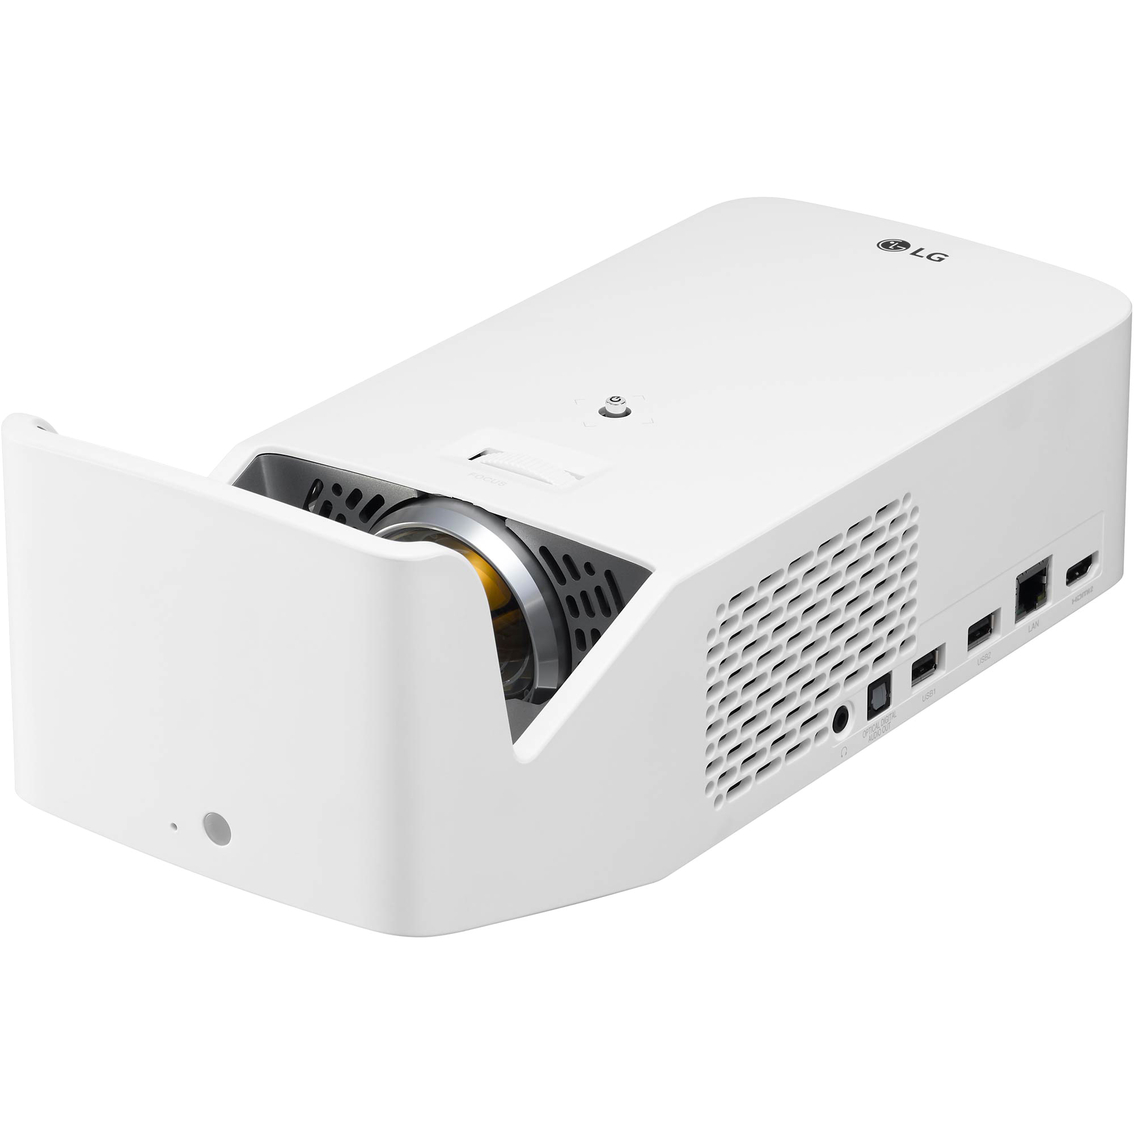 LG HF65LA CineBeam Ultra Short Throw LED Smart Home Theater Projector - Image 9 of 10